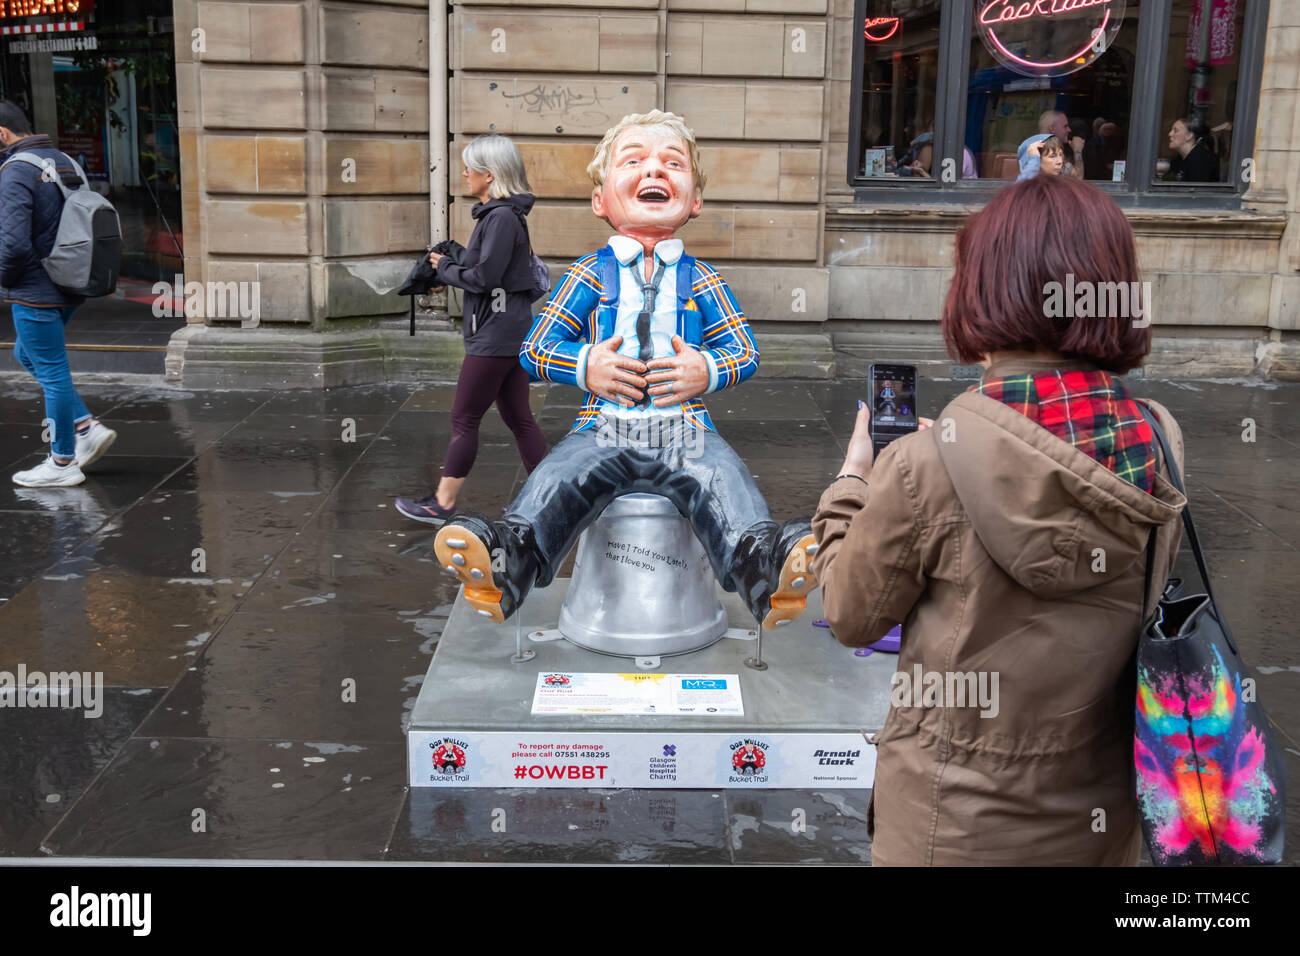 Glasgow, Scotland, UK. 17th June, 2019. Oor Rod, created by Graham Farquhar. This statue is a tribute to Rod Stewart who is a man of many facets: the rock star, the songwriter, the father of eight, the full time curator of one of history's most famous haircuts, the tireless Scottish football fan the football player, Complete with his tartan jacket, signature hairstyle and his most famous song lyrics around the bucket. Oor Rod pays tribute to one of the country's best selling music artists of all time. The sculpture is part of Oor Wullie’s BIG Bucket Trail. Credit: Skully/Alamy Live News Stock Photo